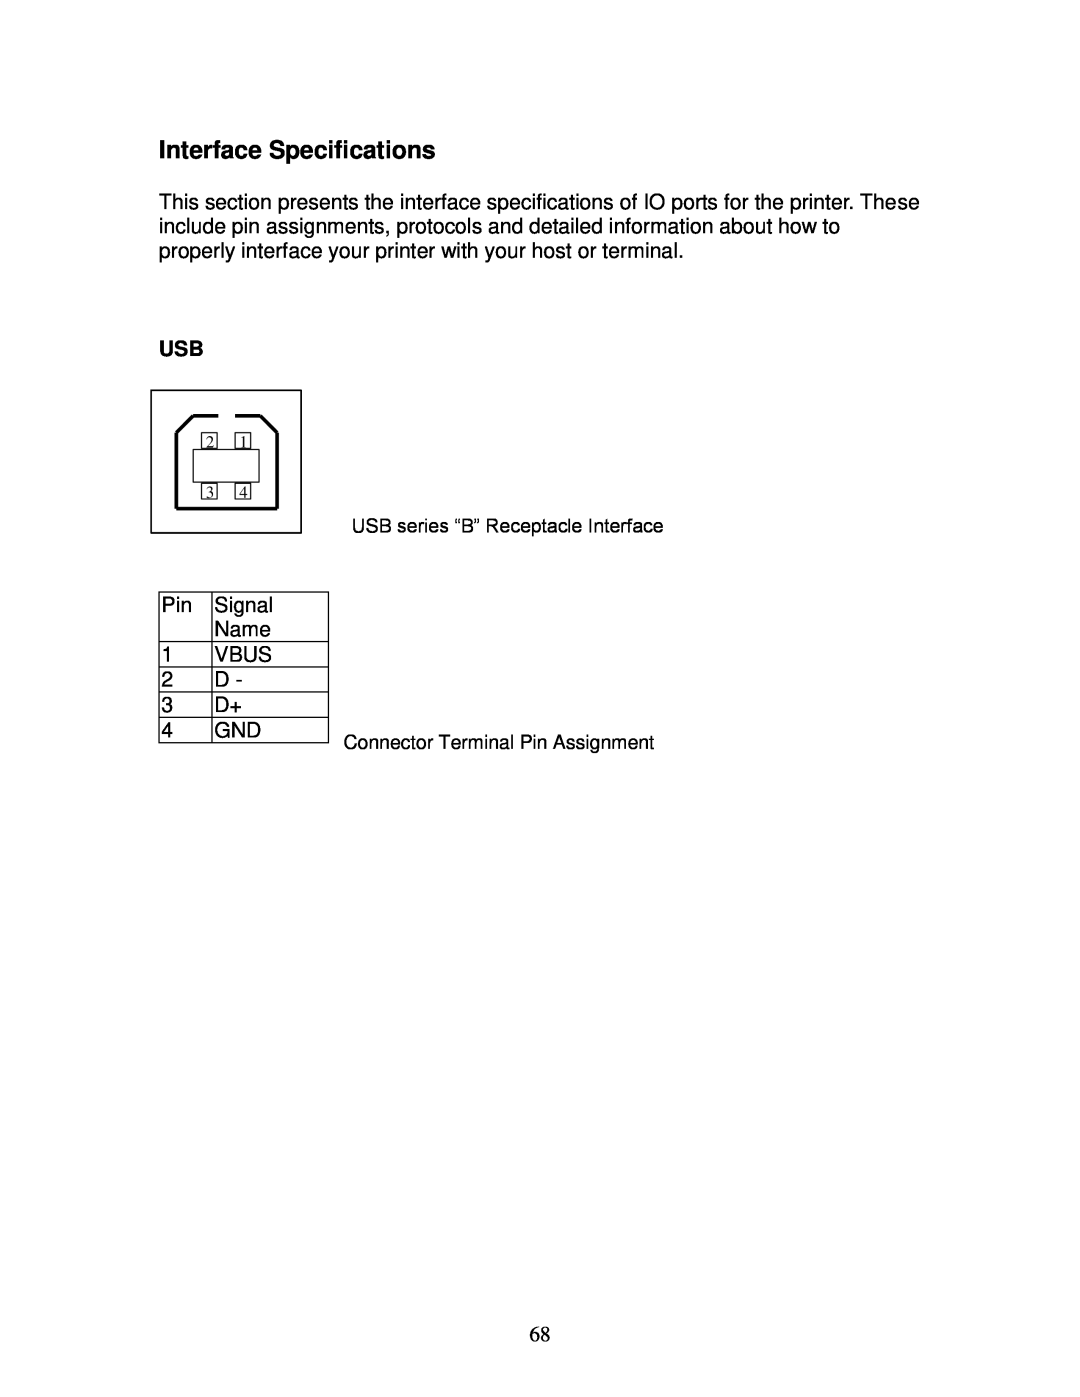 AMT Datasouth 4600 manual Interface Specifications, USB series “B” Receptacle Interface, Connector Terminal Pin Assignment 